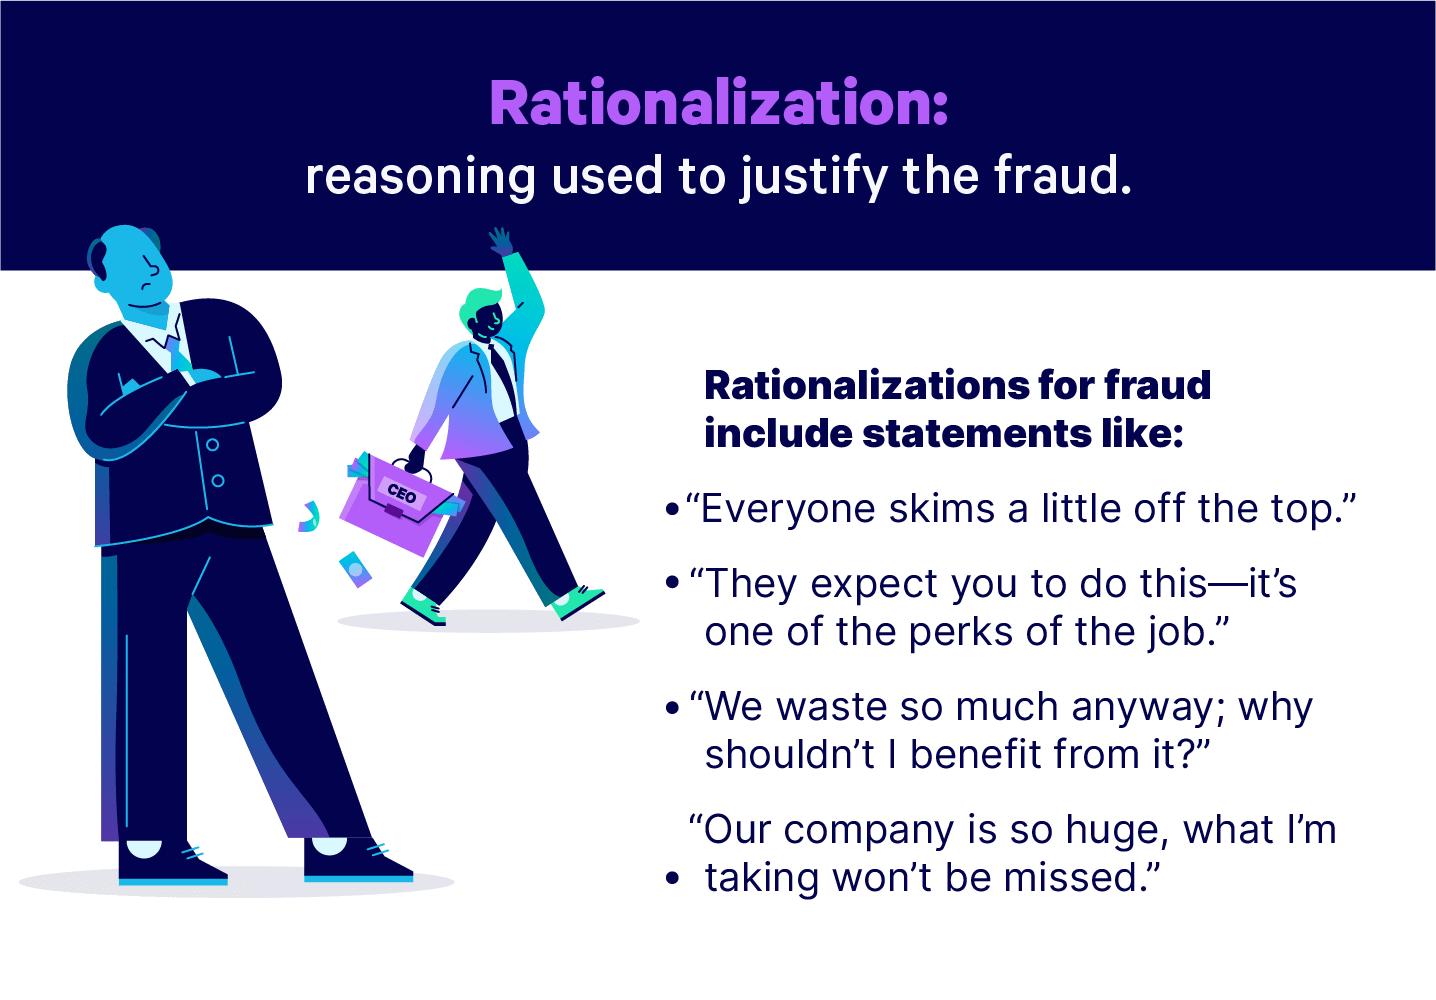 Infographic outlining rationalizations to justify the fraud triangle, two men in business attire one man steals large amounts of money with business briefcase